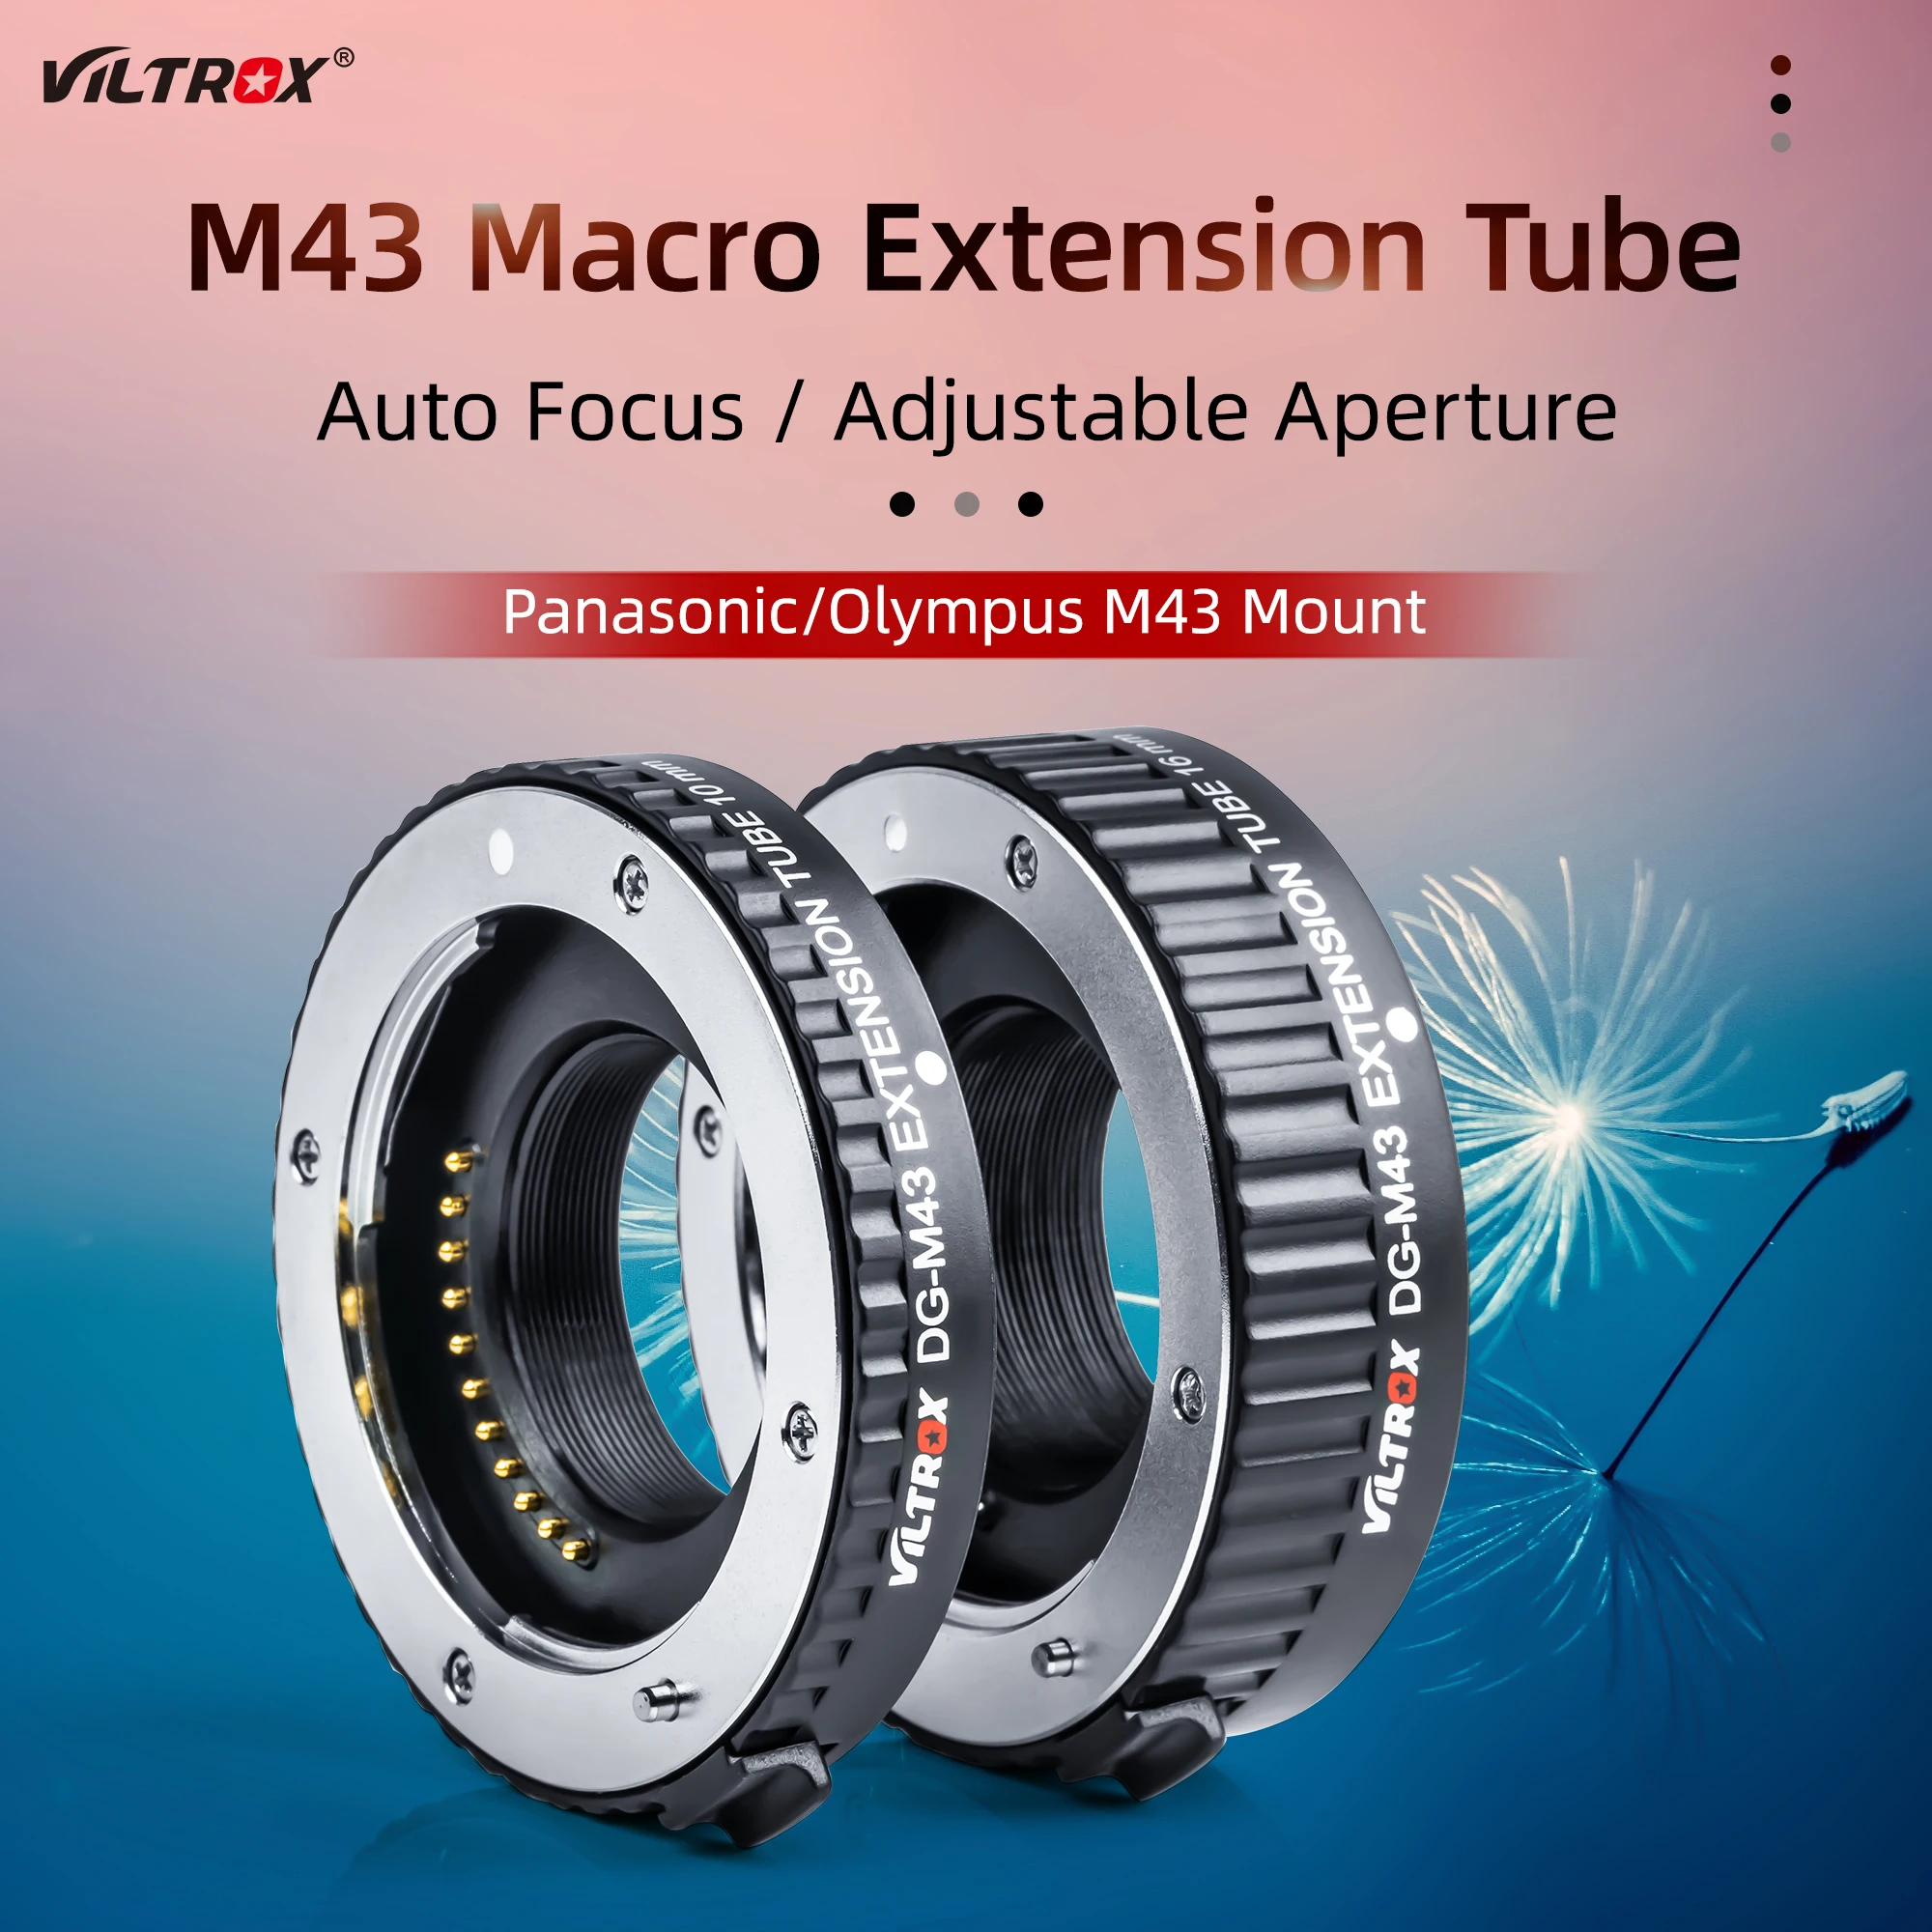 

Viltrox DG-M43 Electronic Metal Auto Focus AF Macro Extension Tube Lens Adapter 10MM 16MM For Panasonic Olympus M43 Mount Camera